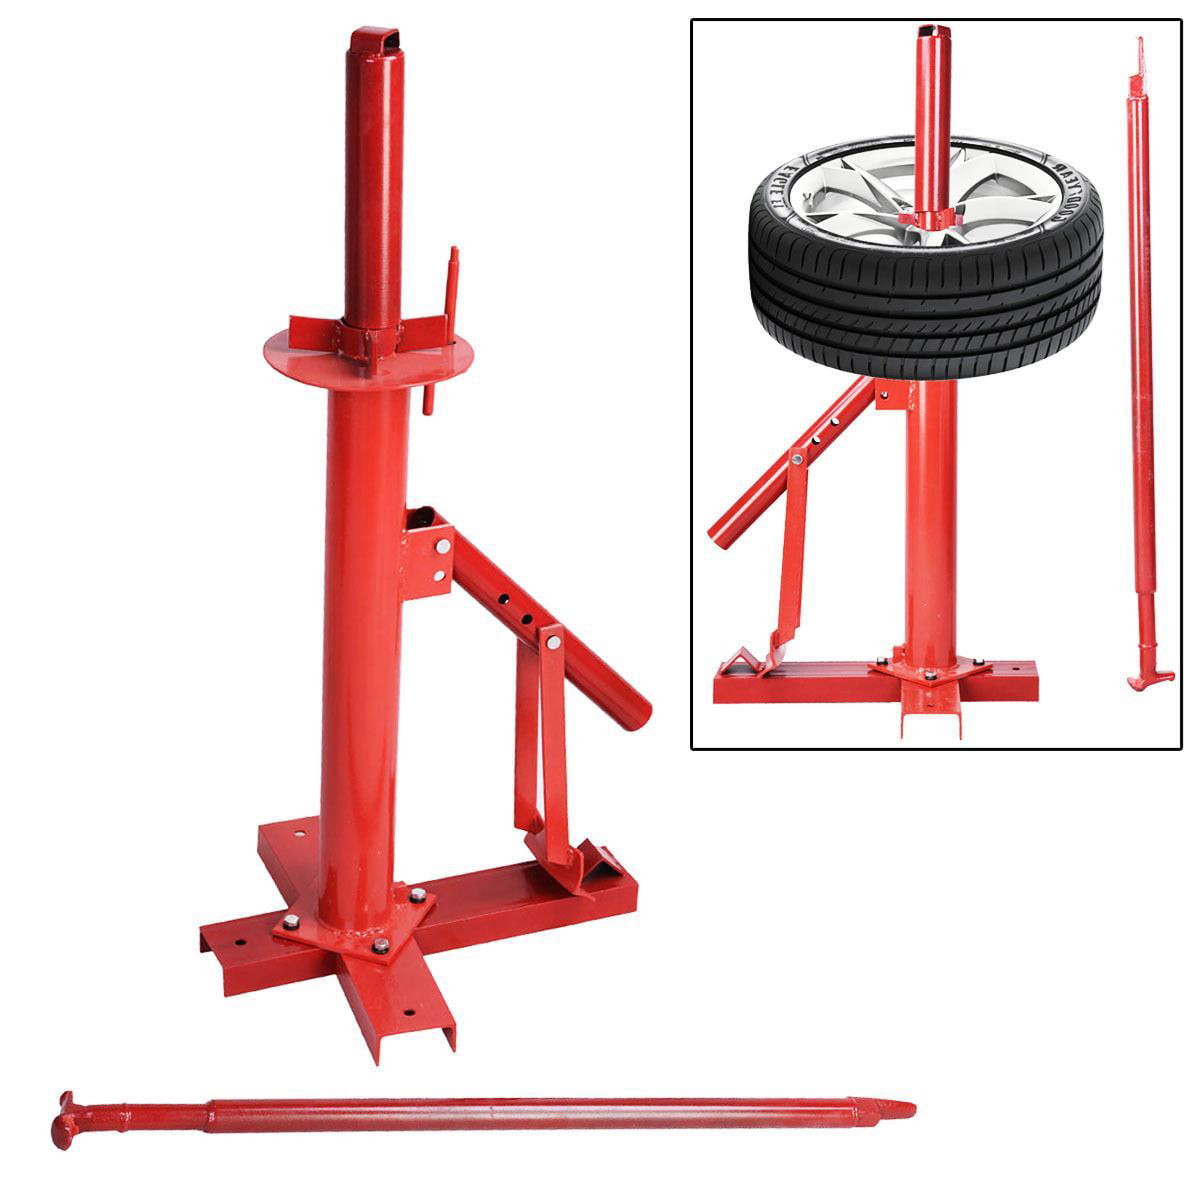 Manual Portable Hand Tire Changer Bead Breaker Tool Mounting Home Shop Auto DIY 